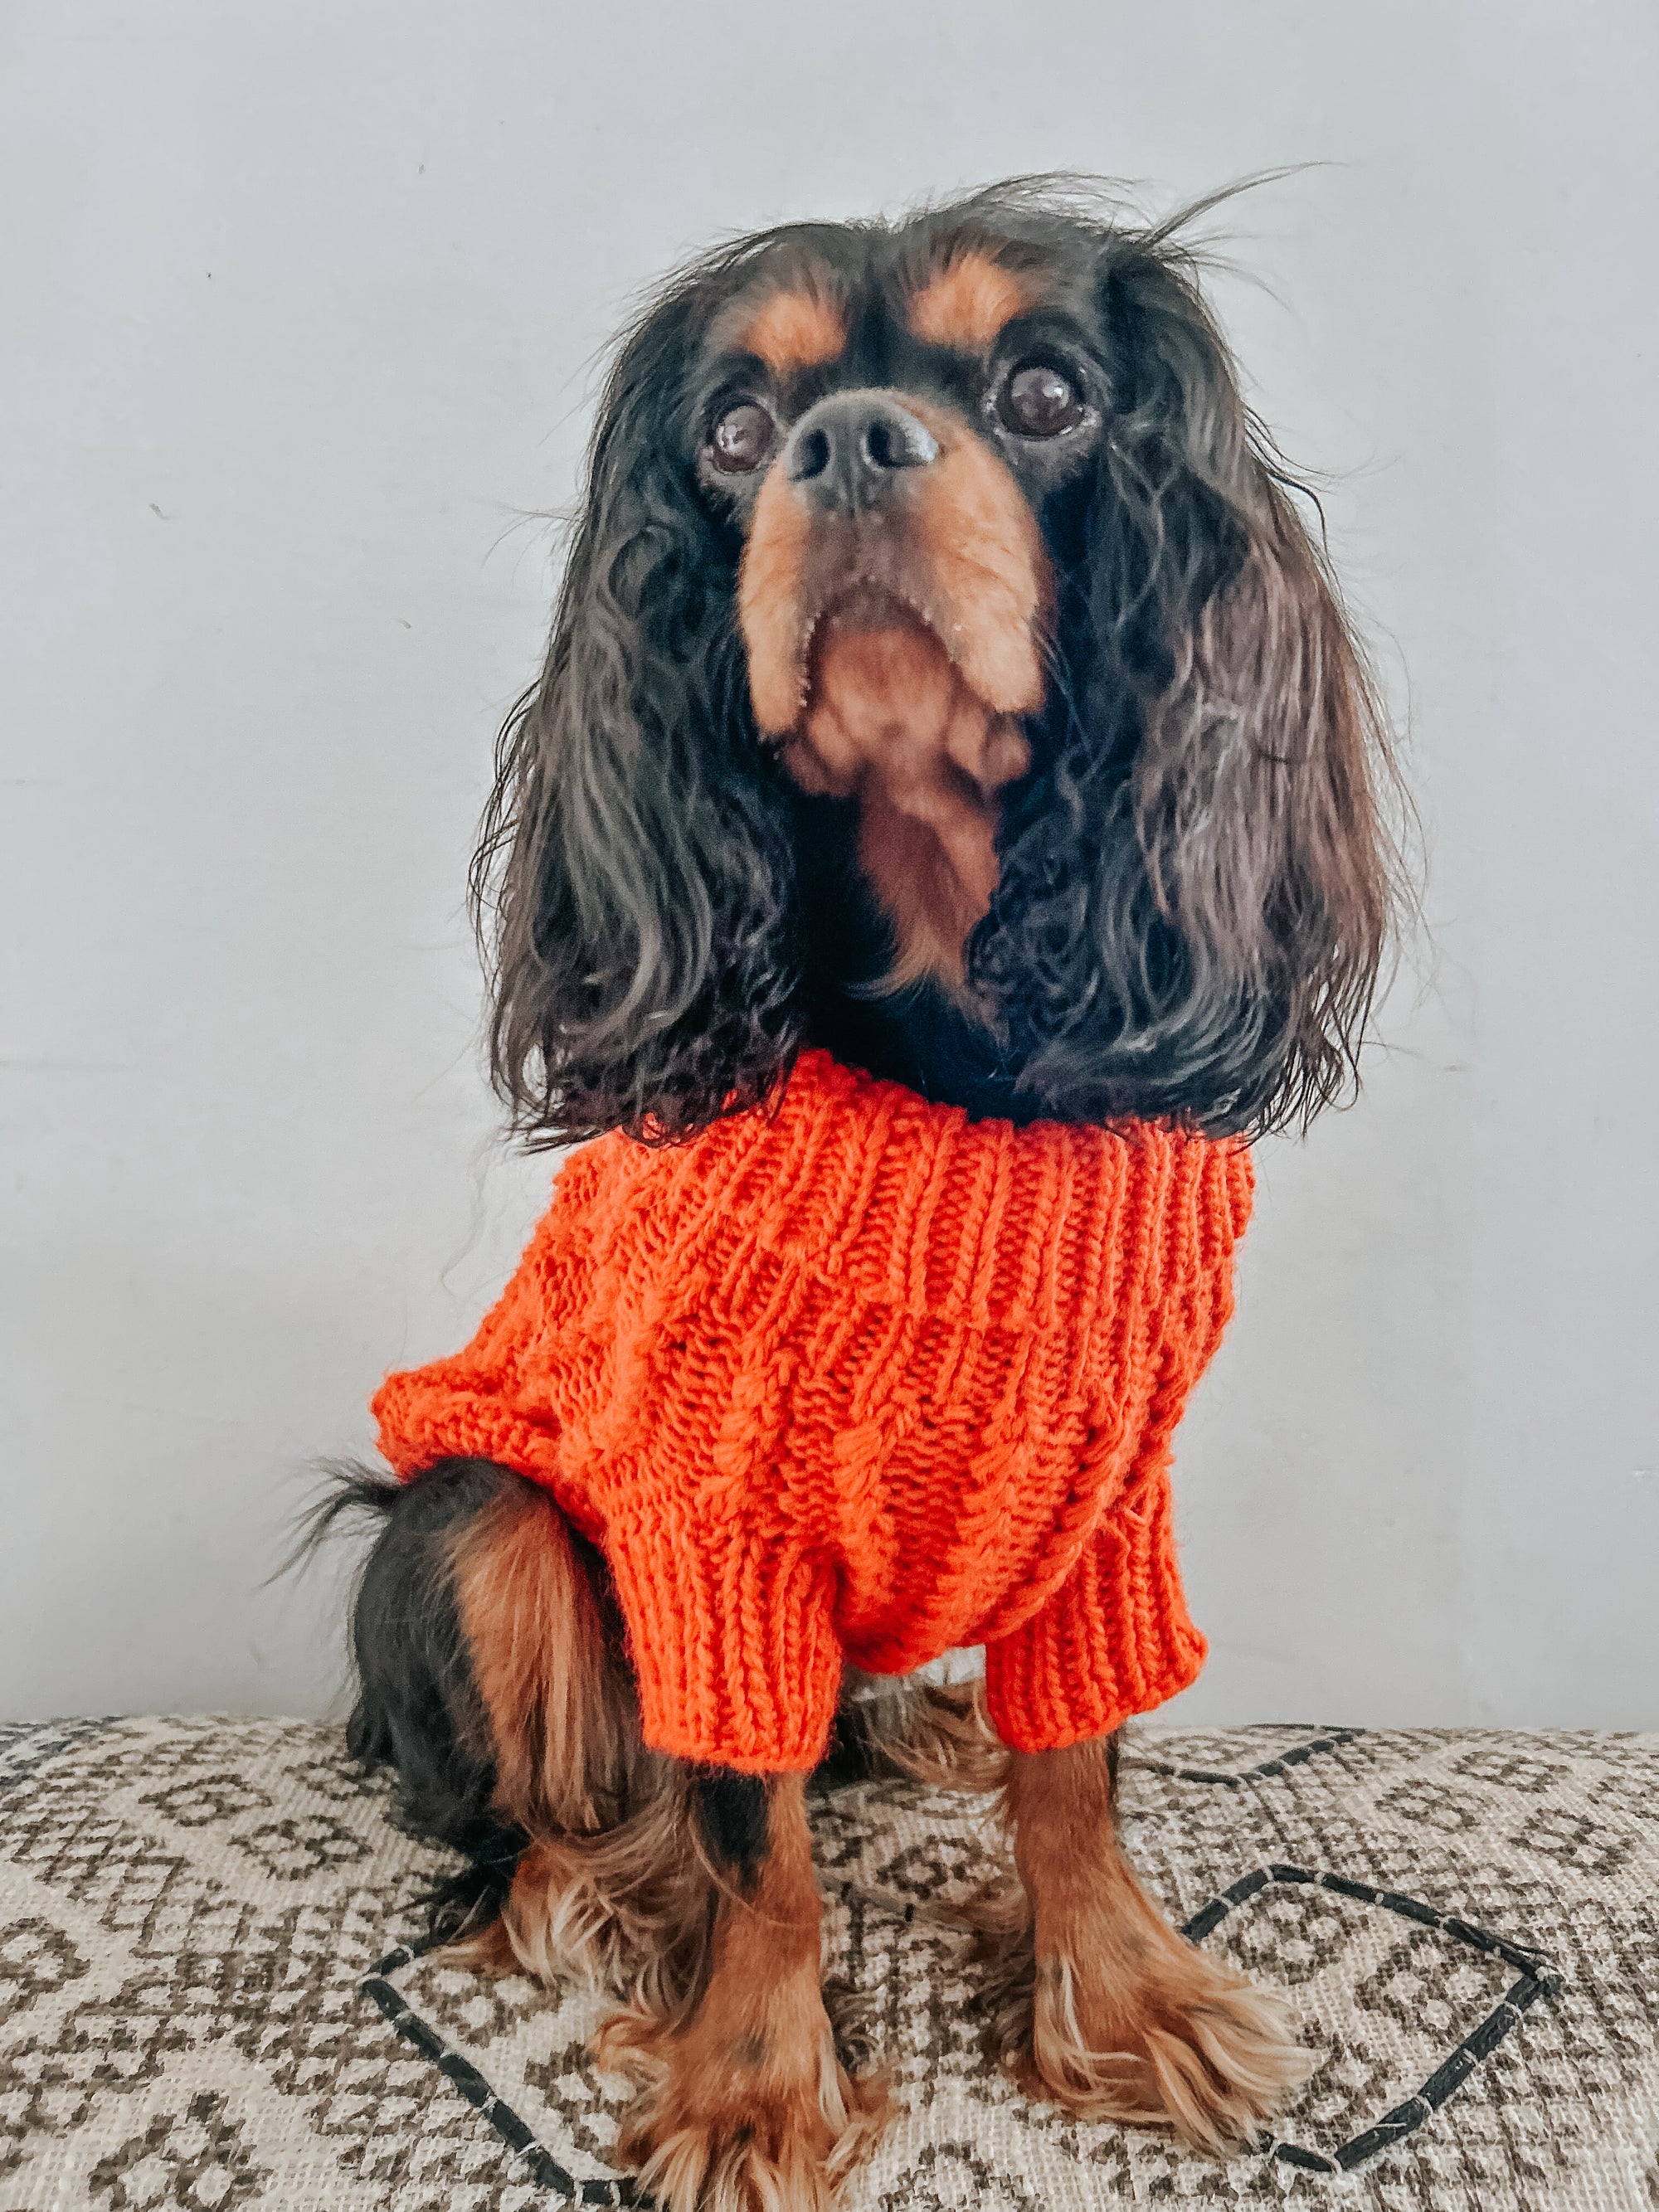 INFLUENCER_CONTENT | @PENNYTHECAVALIER2020 | SIZE M